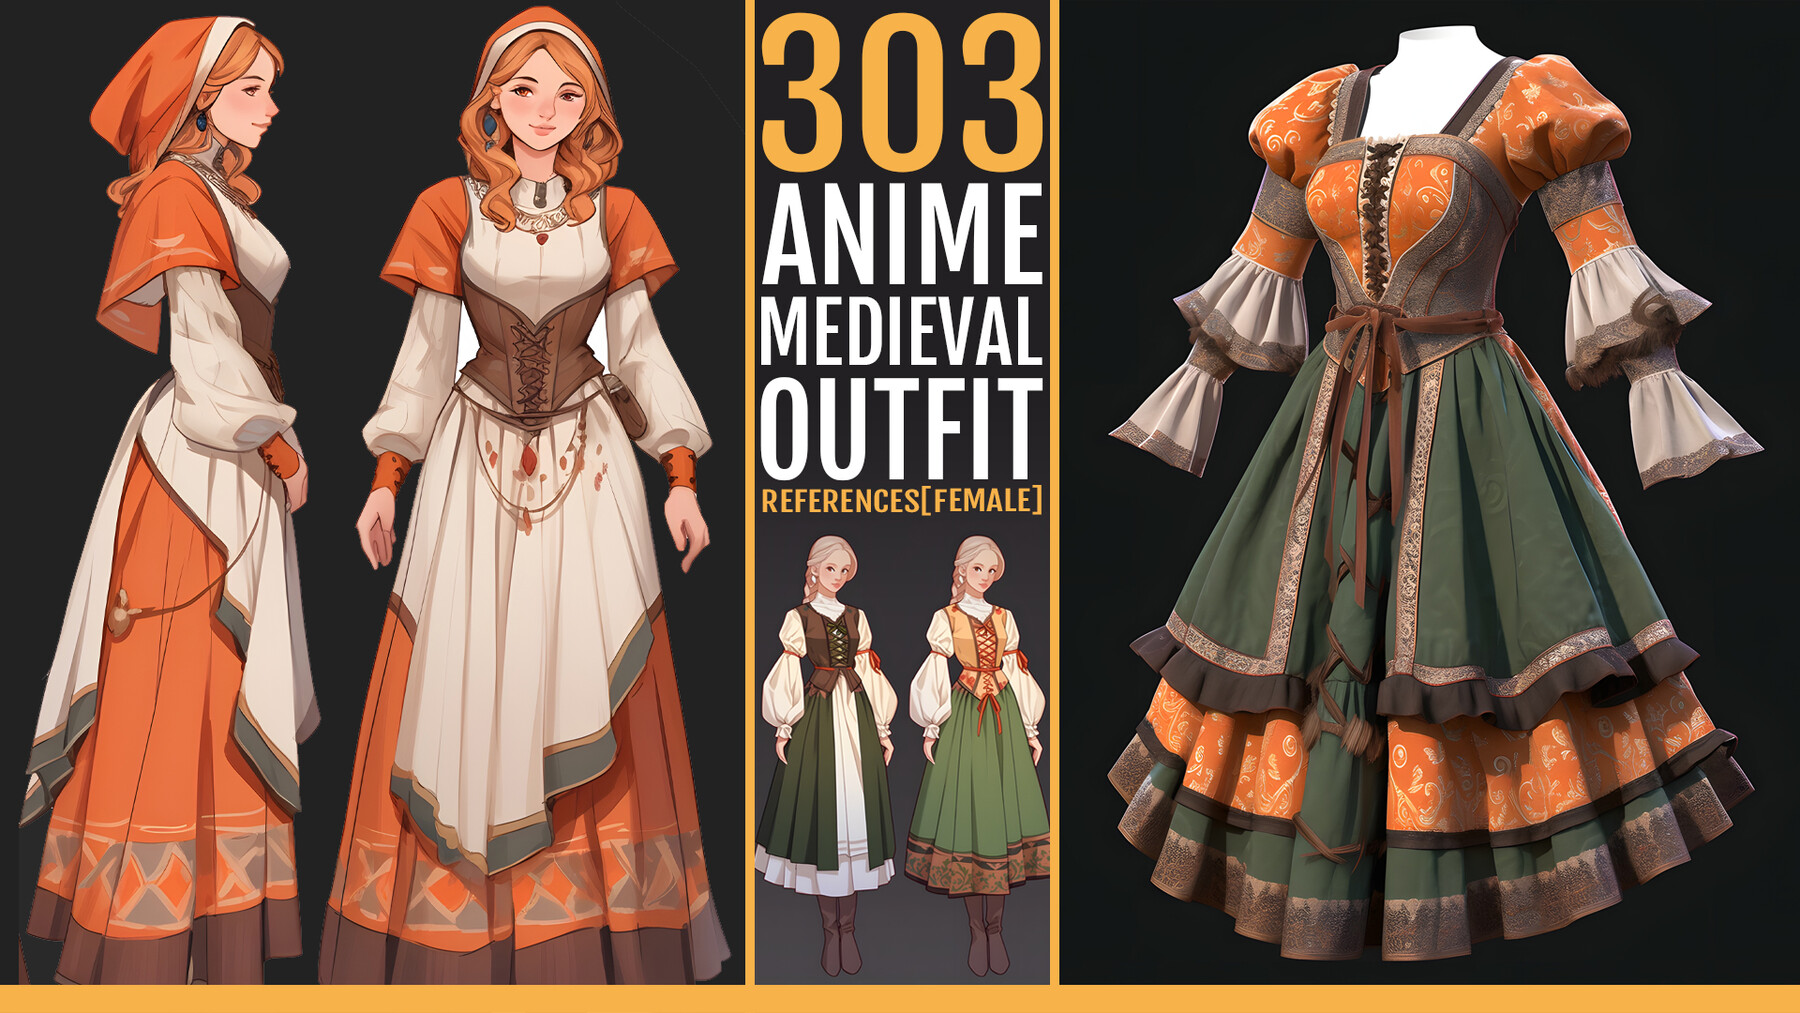 ArtStation  303 Anime Medieval Outfit male  Artworks